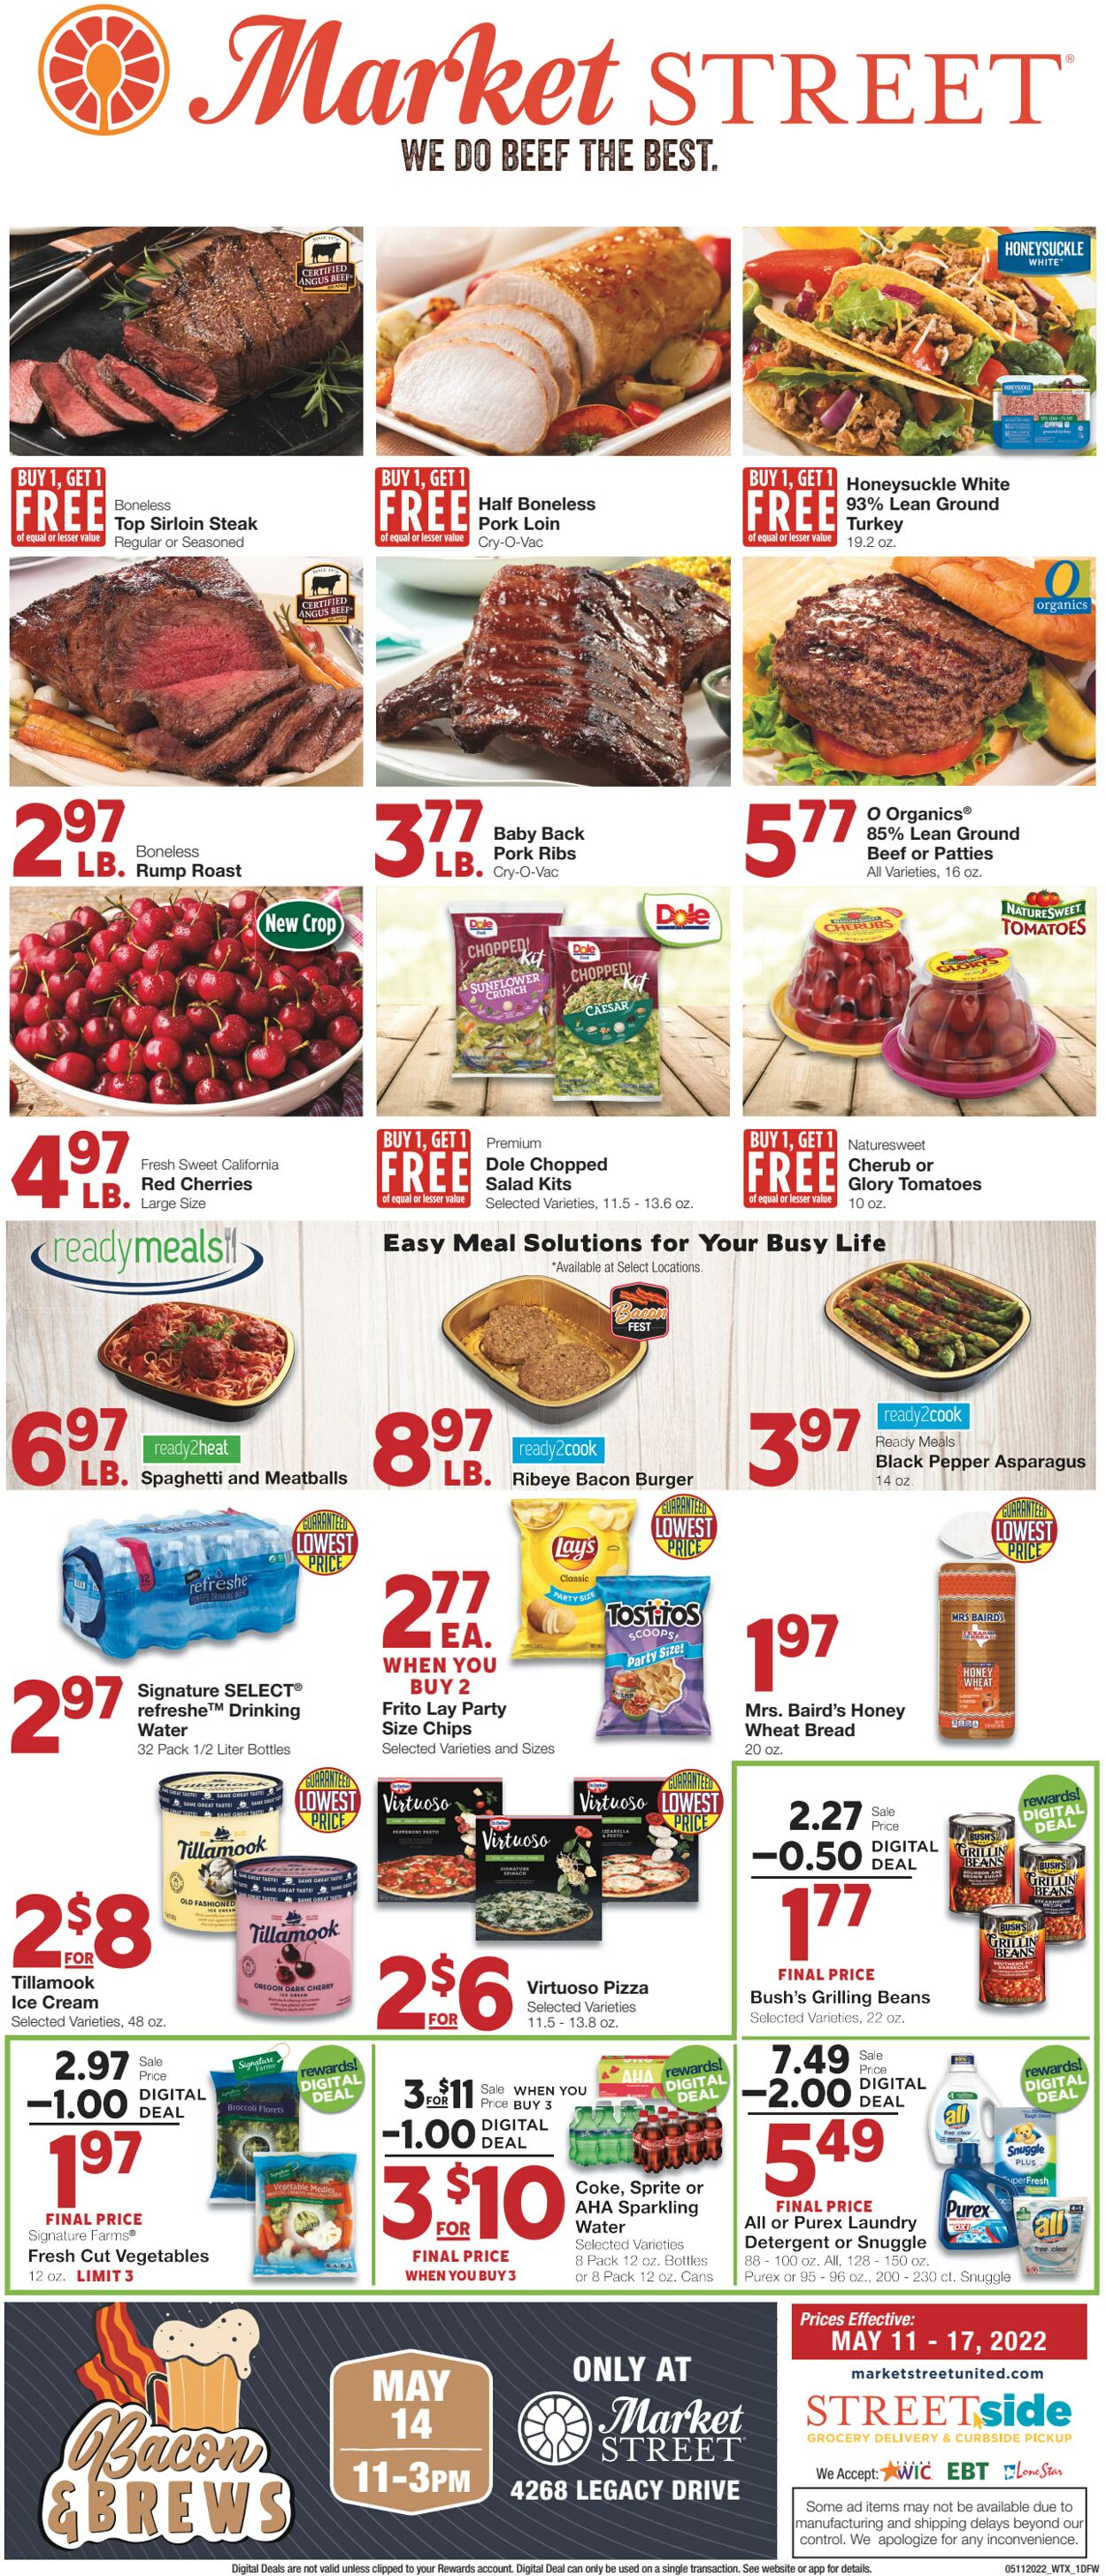 United Supermarkets Promotional weekly ads